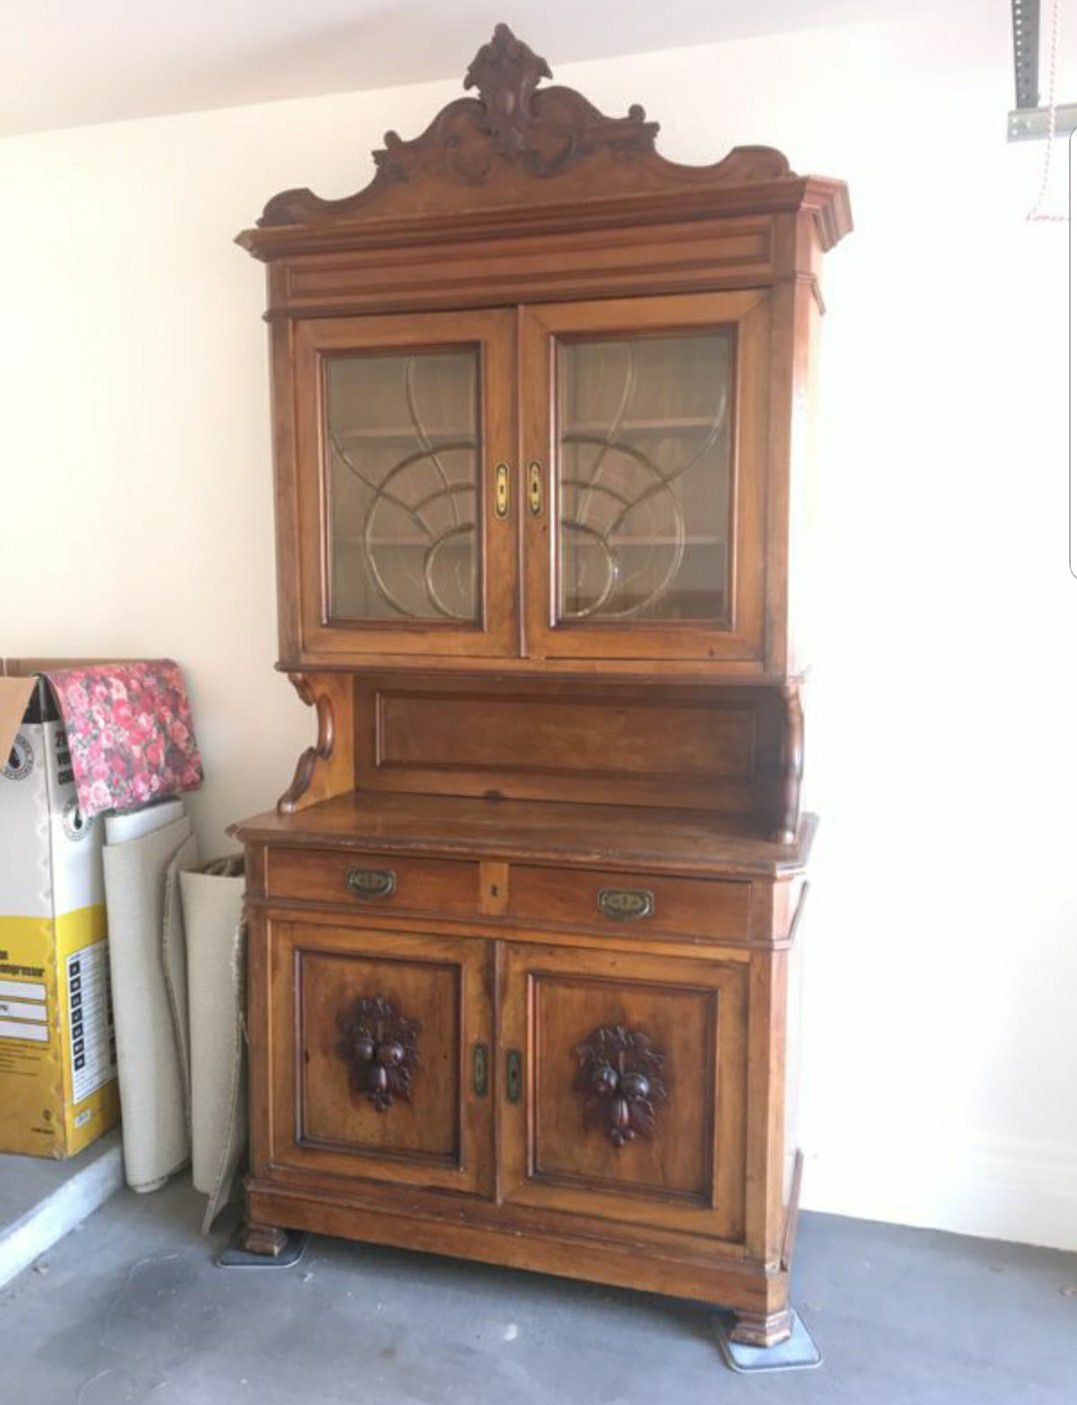 ANTIQUE SOLID WOOD CHINA CABINET CURIO DISPLAY BUFFET SERVER BEAUTIFUL CARVED SKELETON KEY FARMHOUSE VICTORIAN ANTIQUE DEALERS DREAM